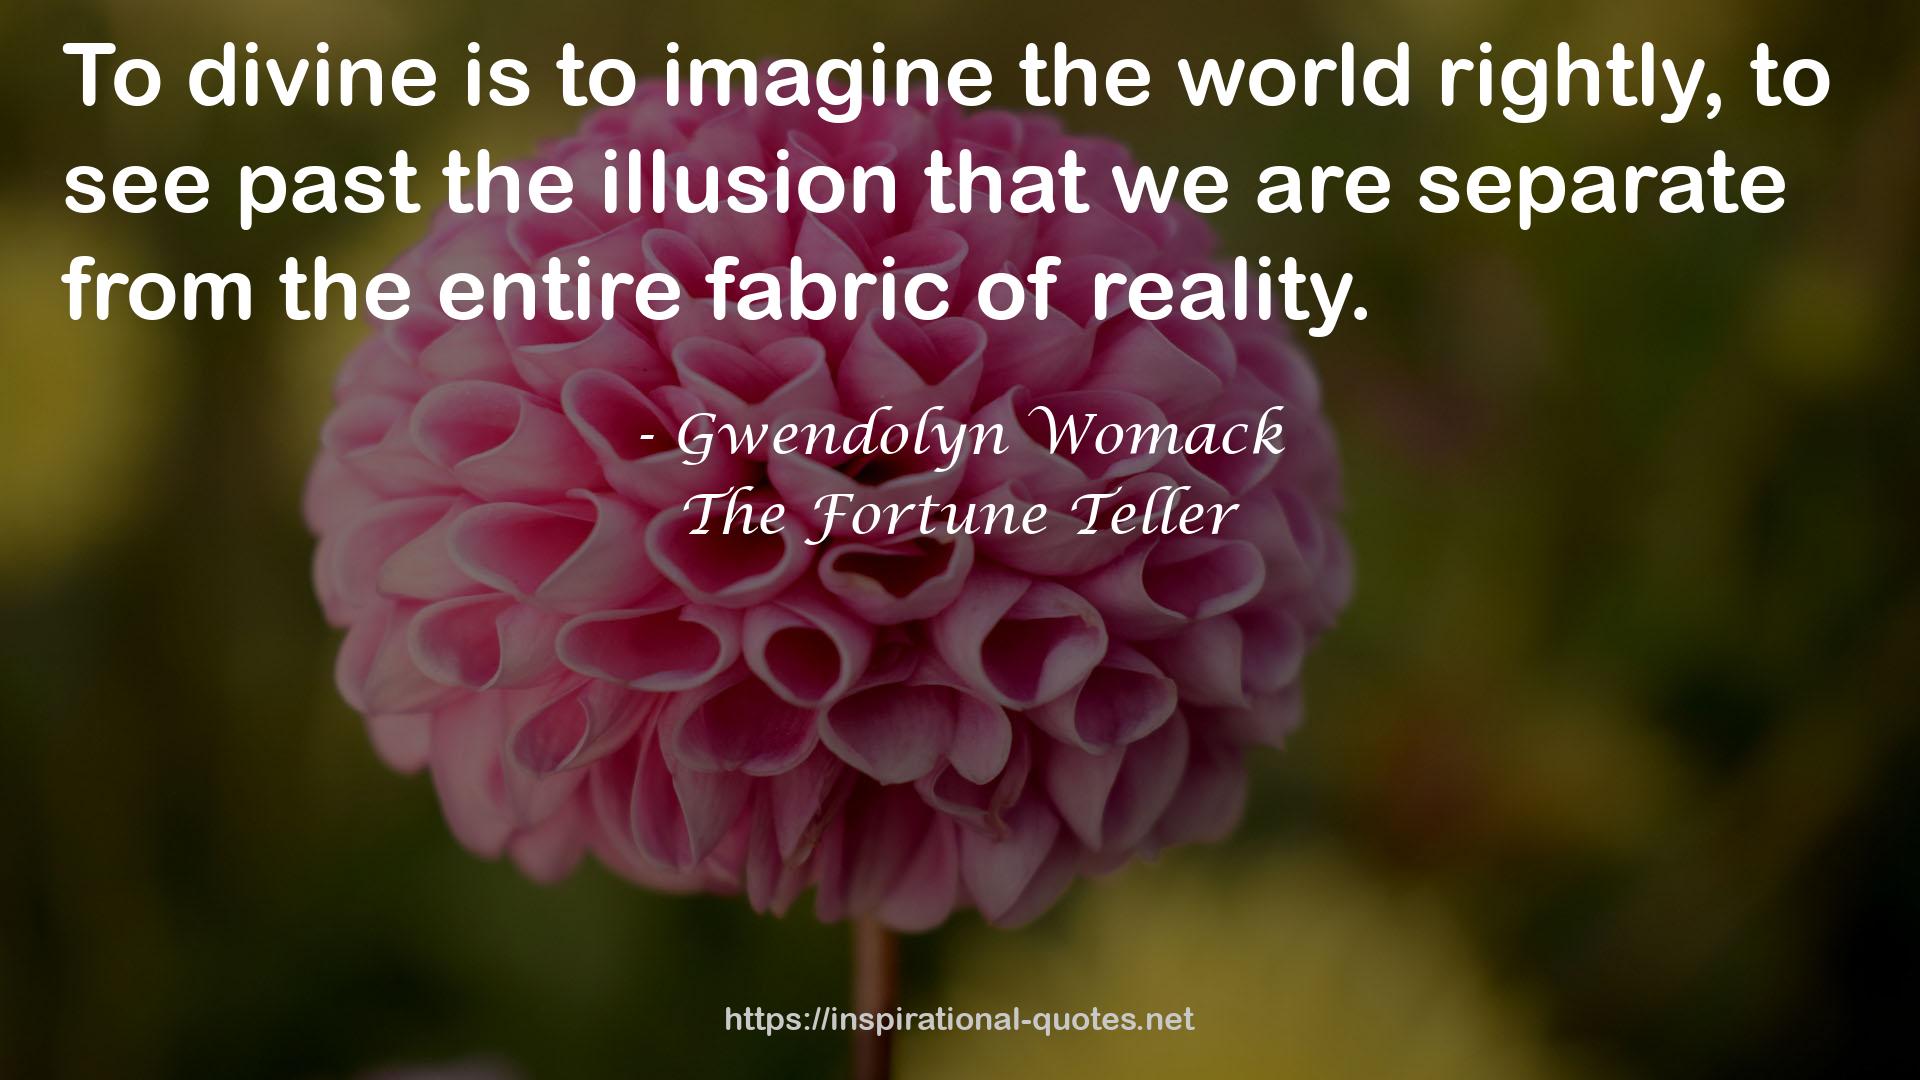 The Fortune Teller QUOTES